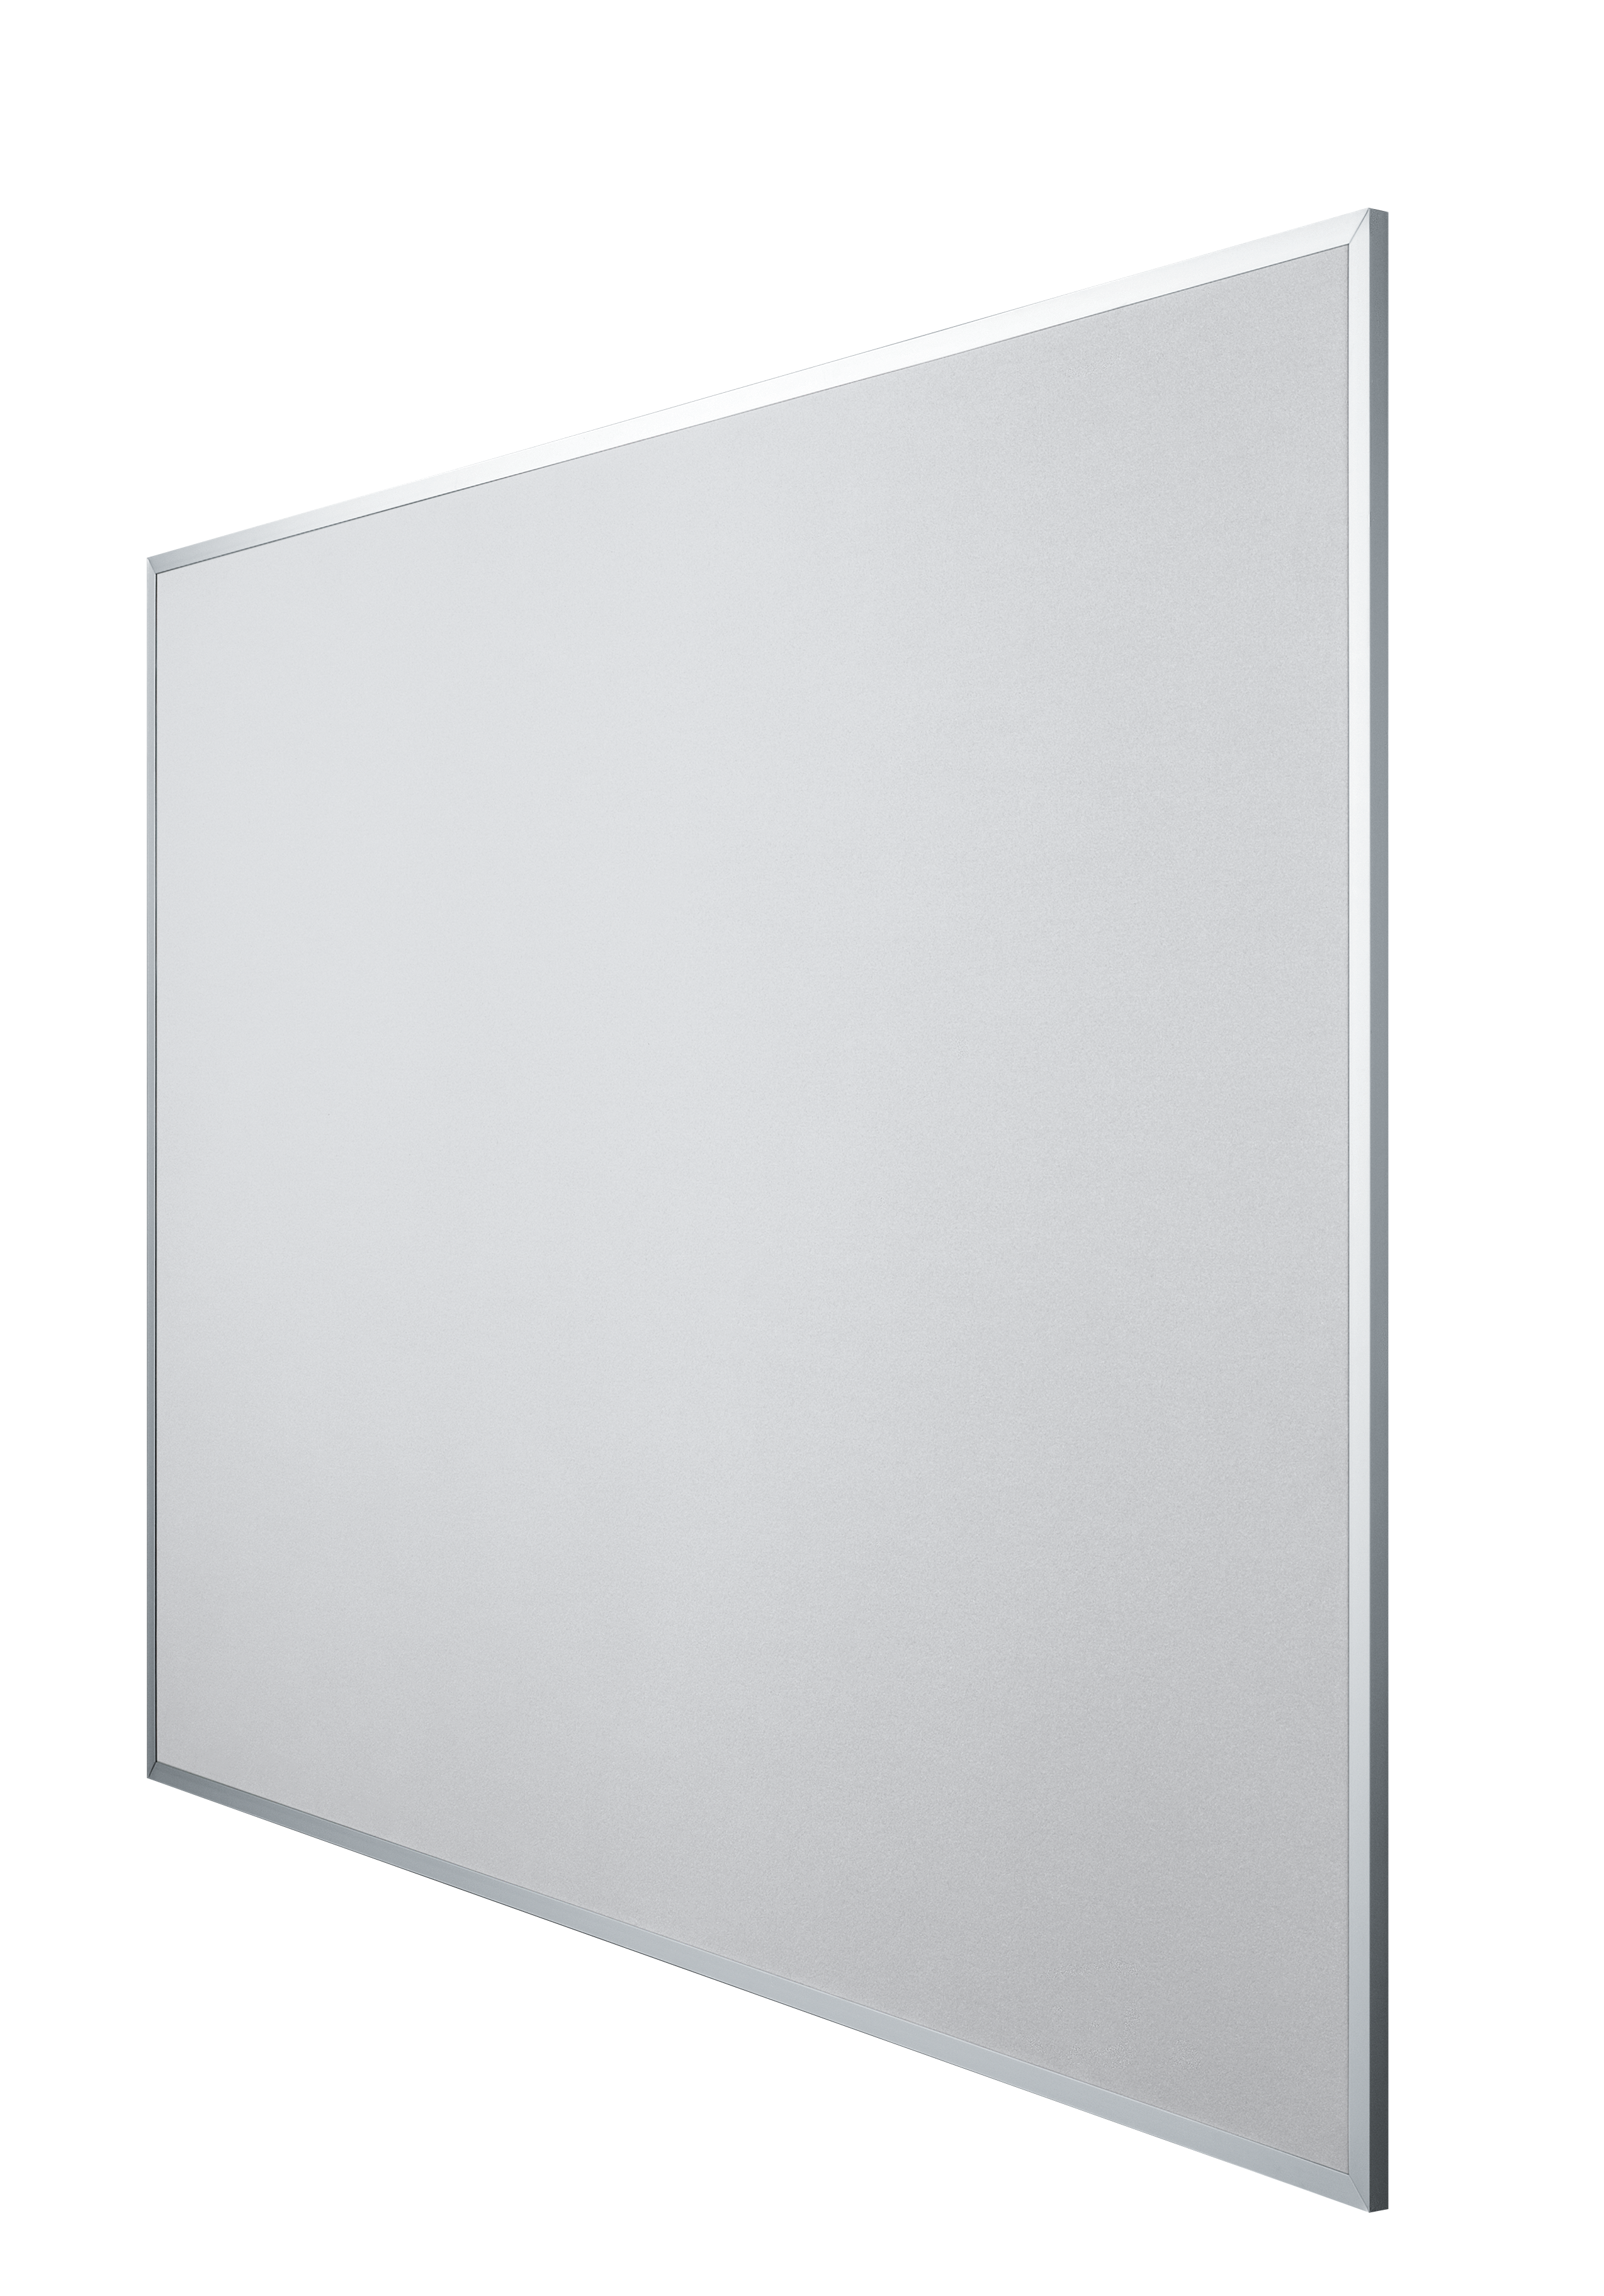 ASI 9800 Quick Ship Porcelain Markerboard 4-Sided Frame 2' X 3', Length: 36